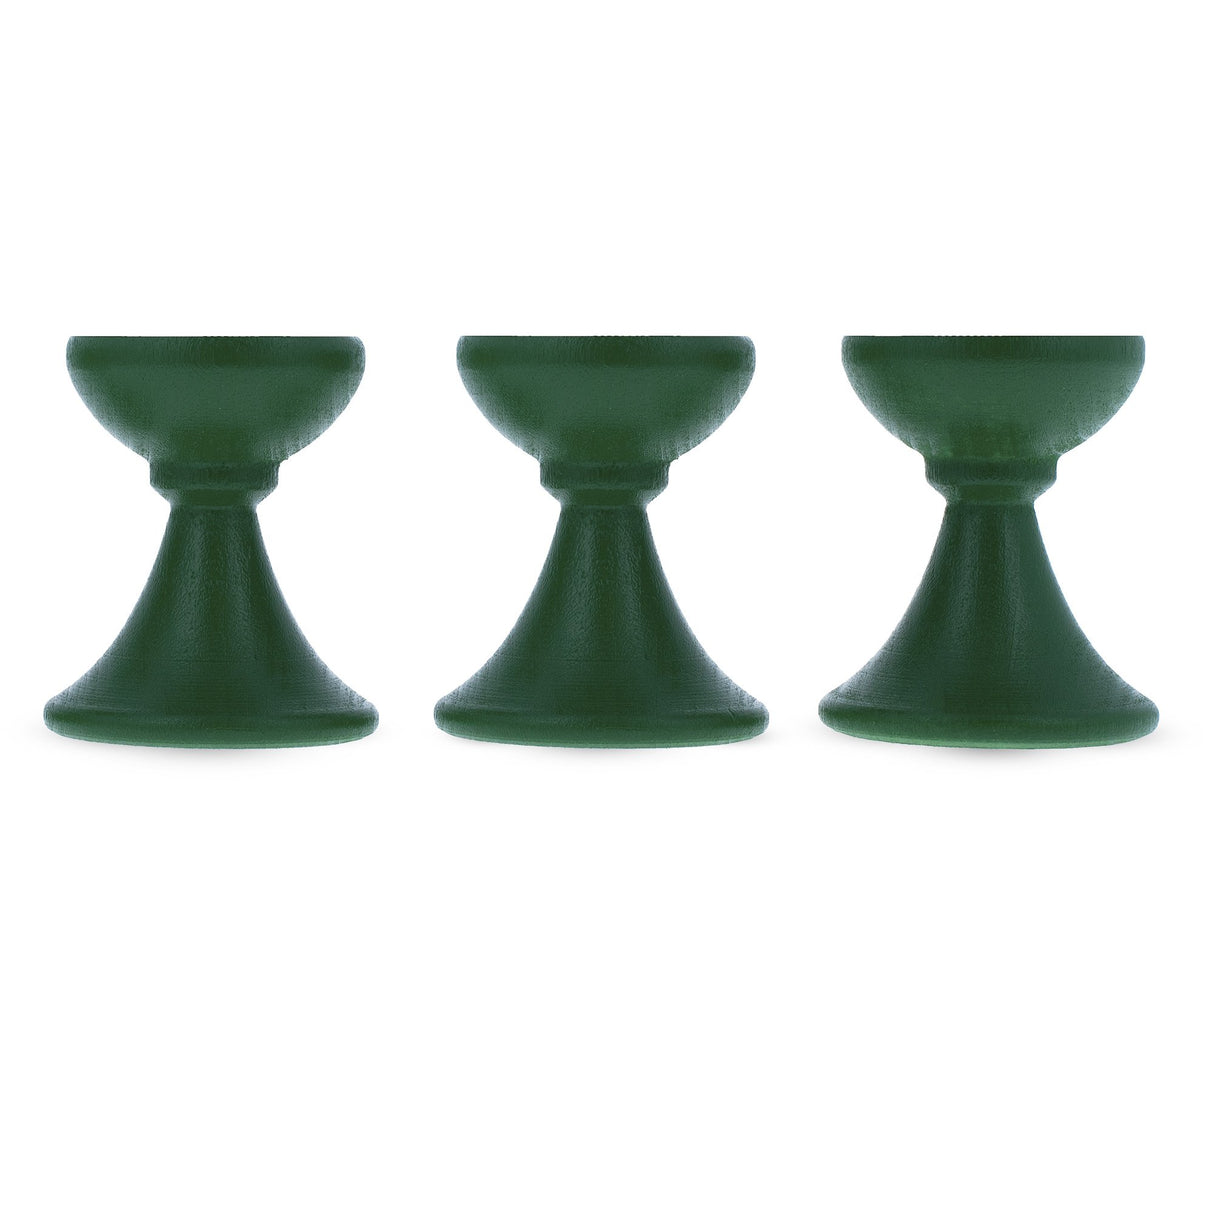 Set of 3 Green Wooden Egg Stands Holders Displays 1.4 Inches in Green color,  shape